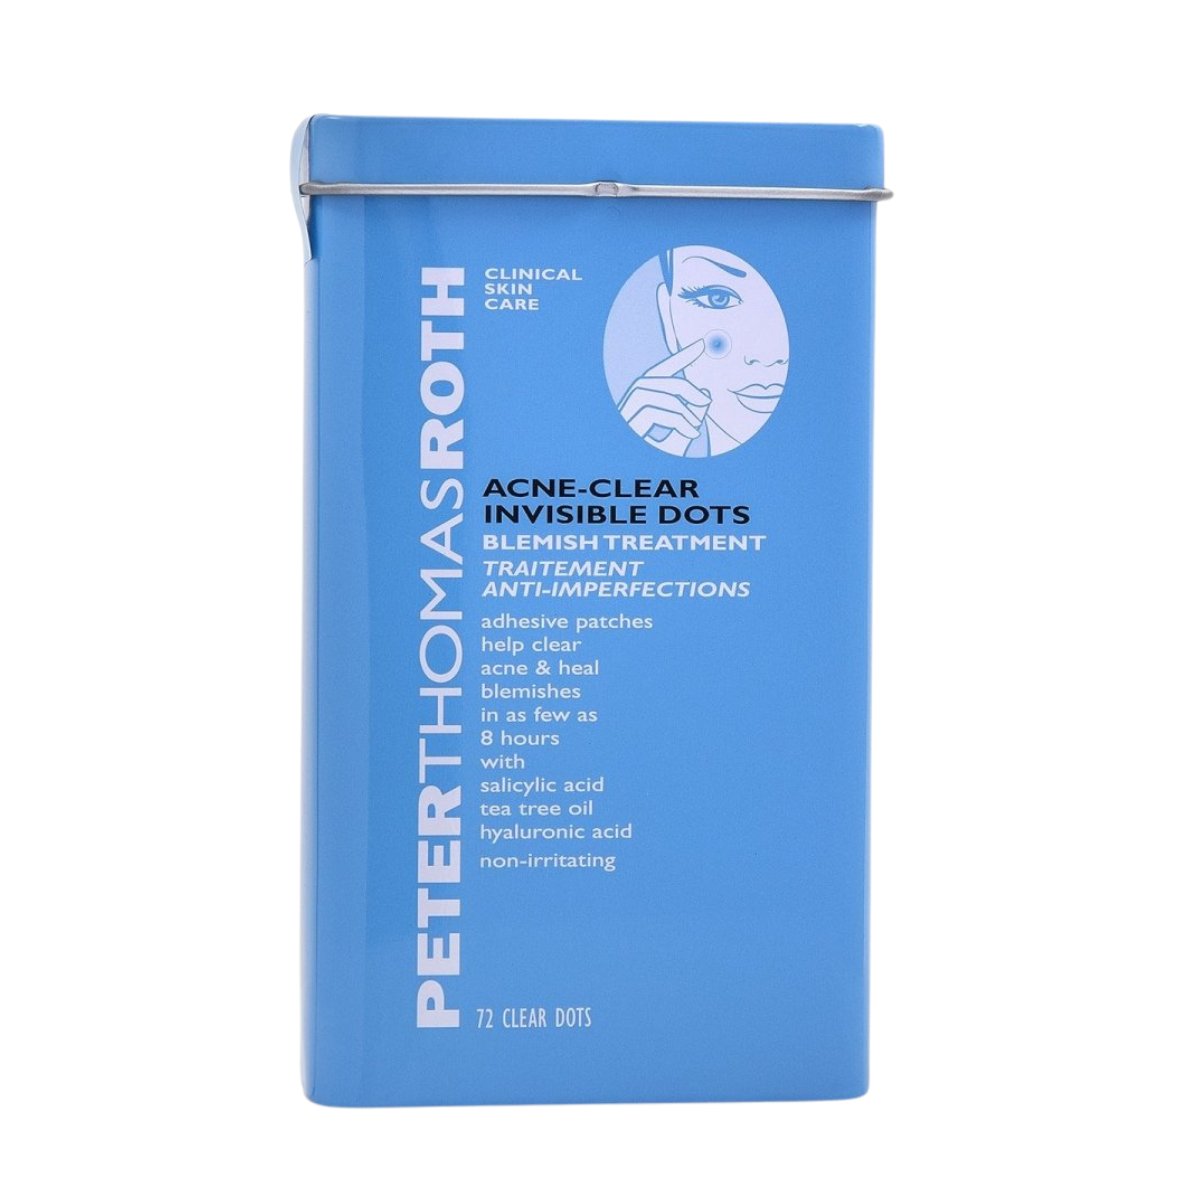 Peter Thomas Roth Acne-Clear Invisible Dots - SkincareEssentials